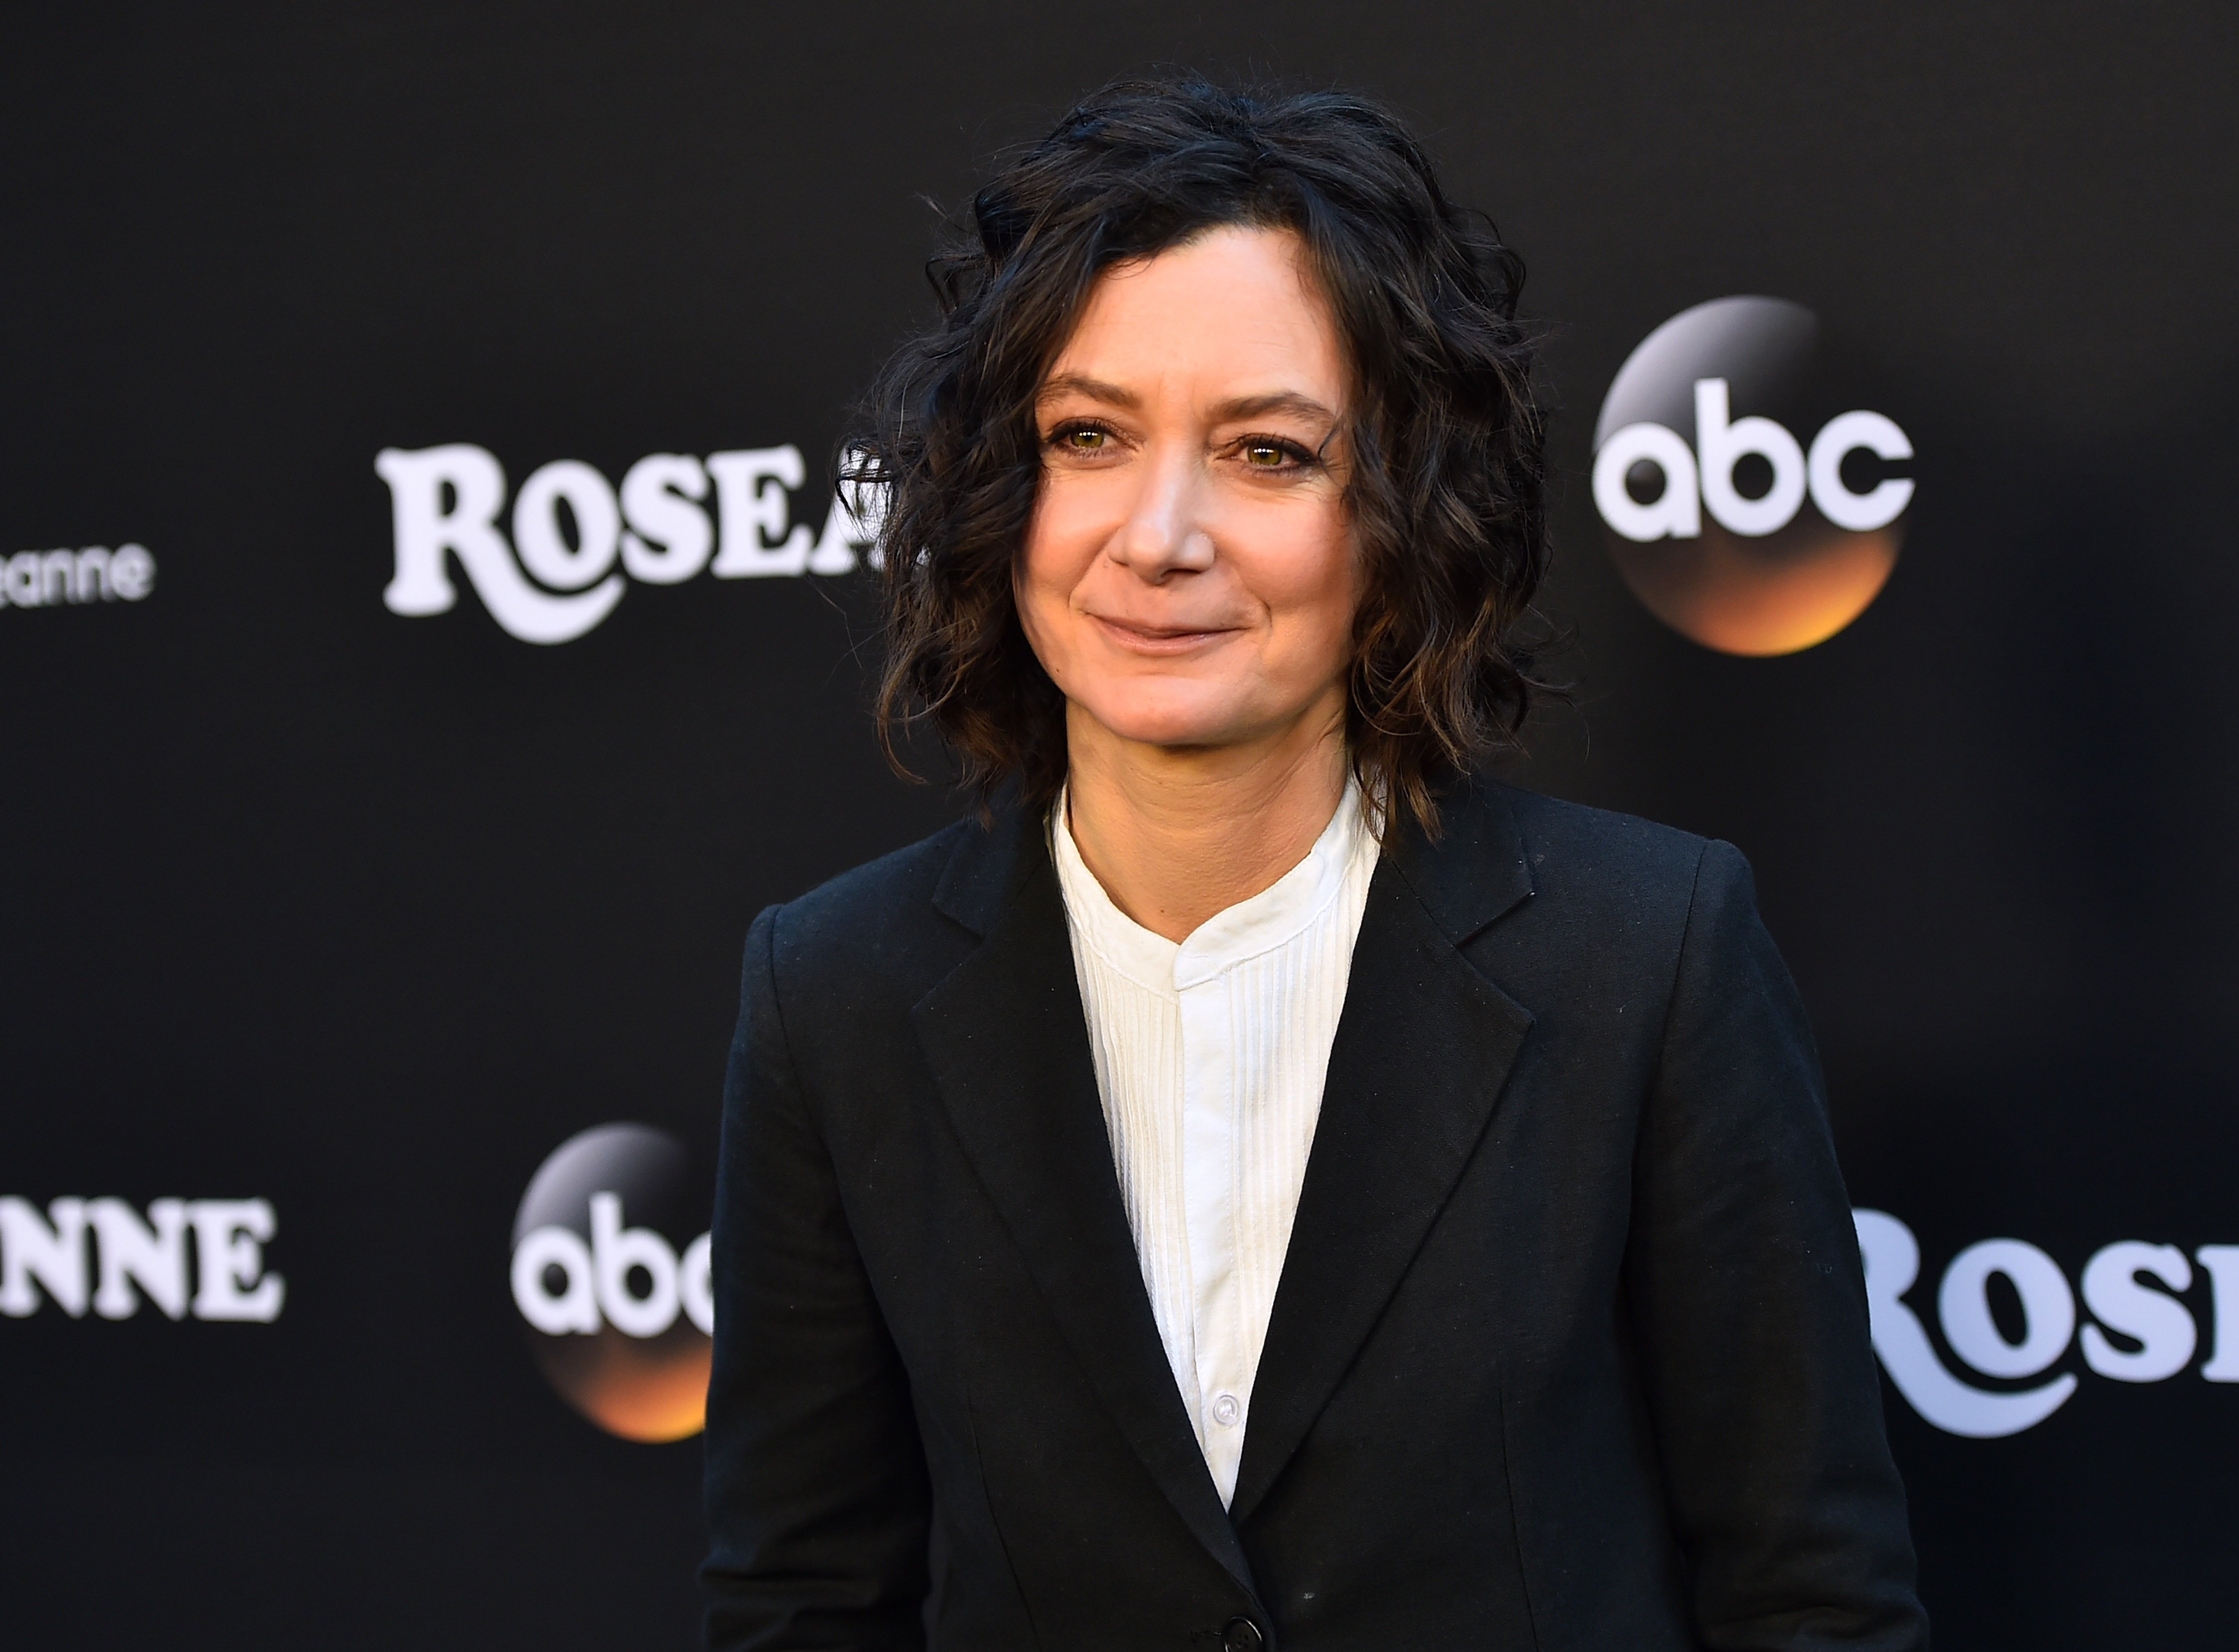 Sara Gilbert attends the premiere of "Roseanne" at Burbank, California on March 23, 2018 | Photo: Getty Images